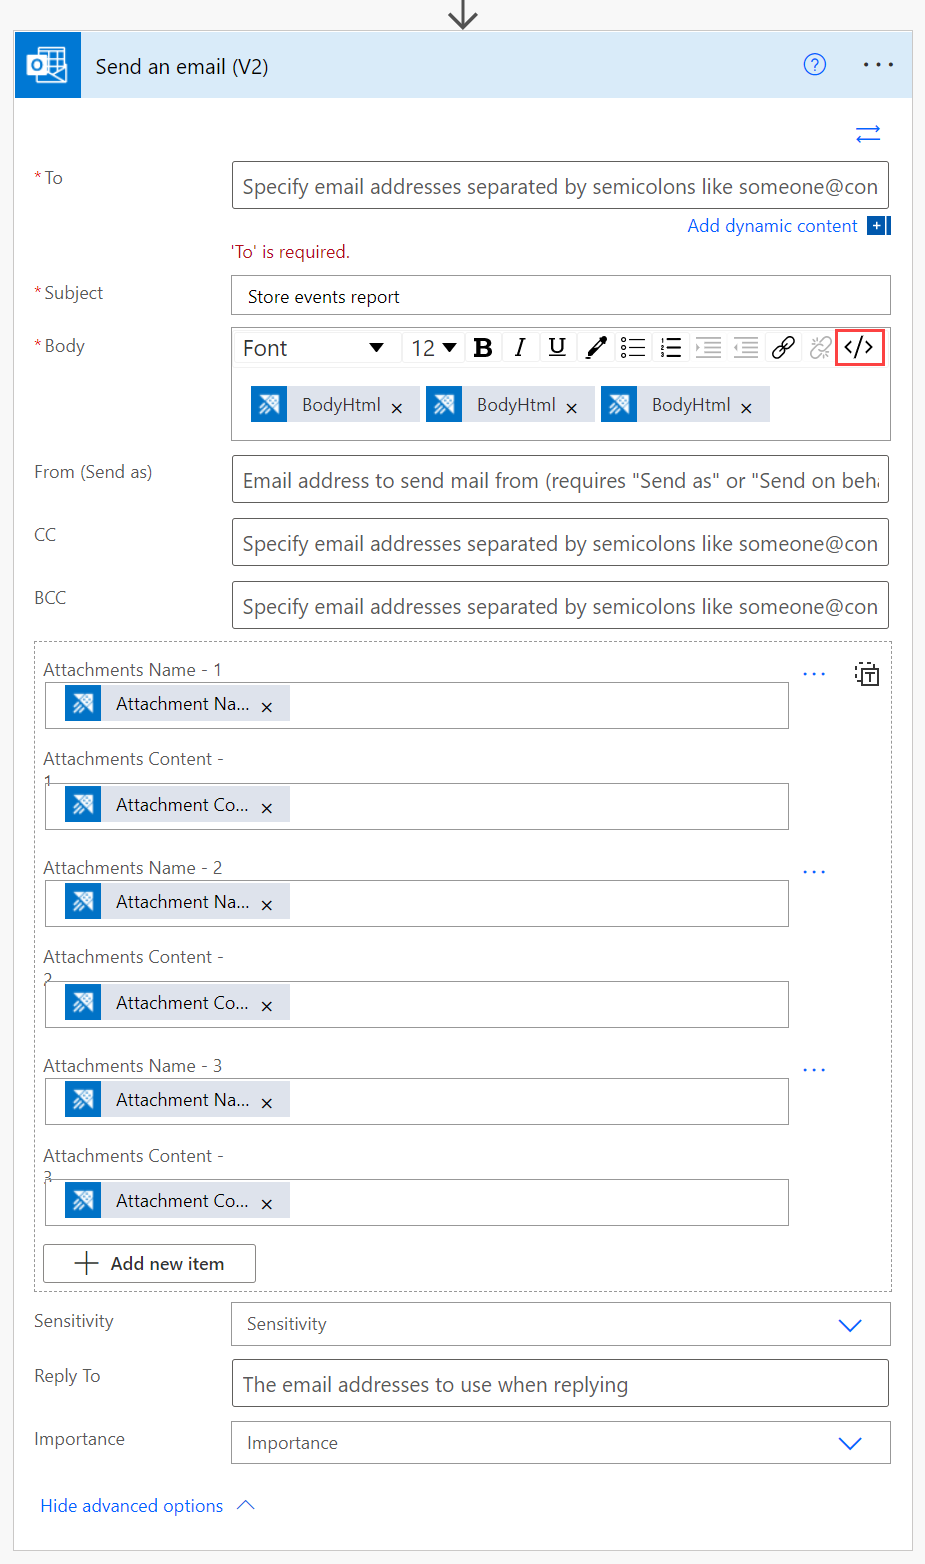 Screenshot of emailing multiple attachments.